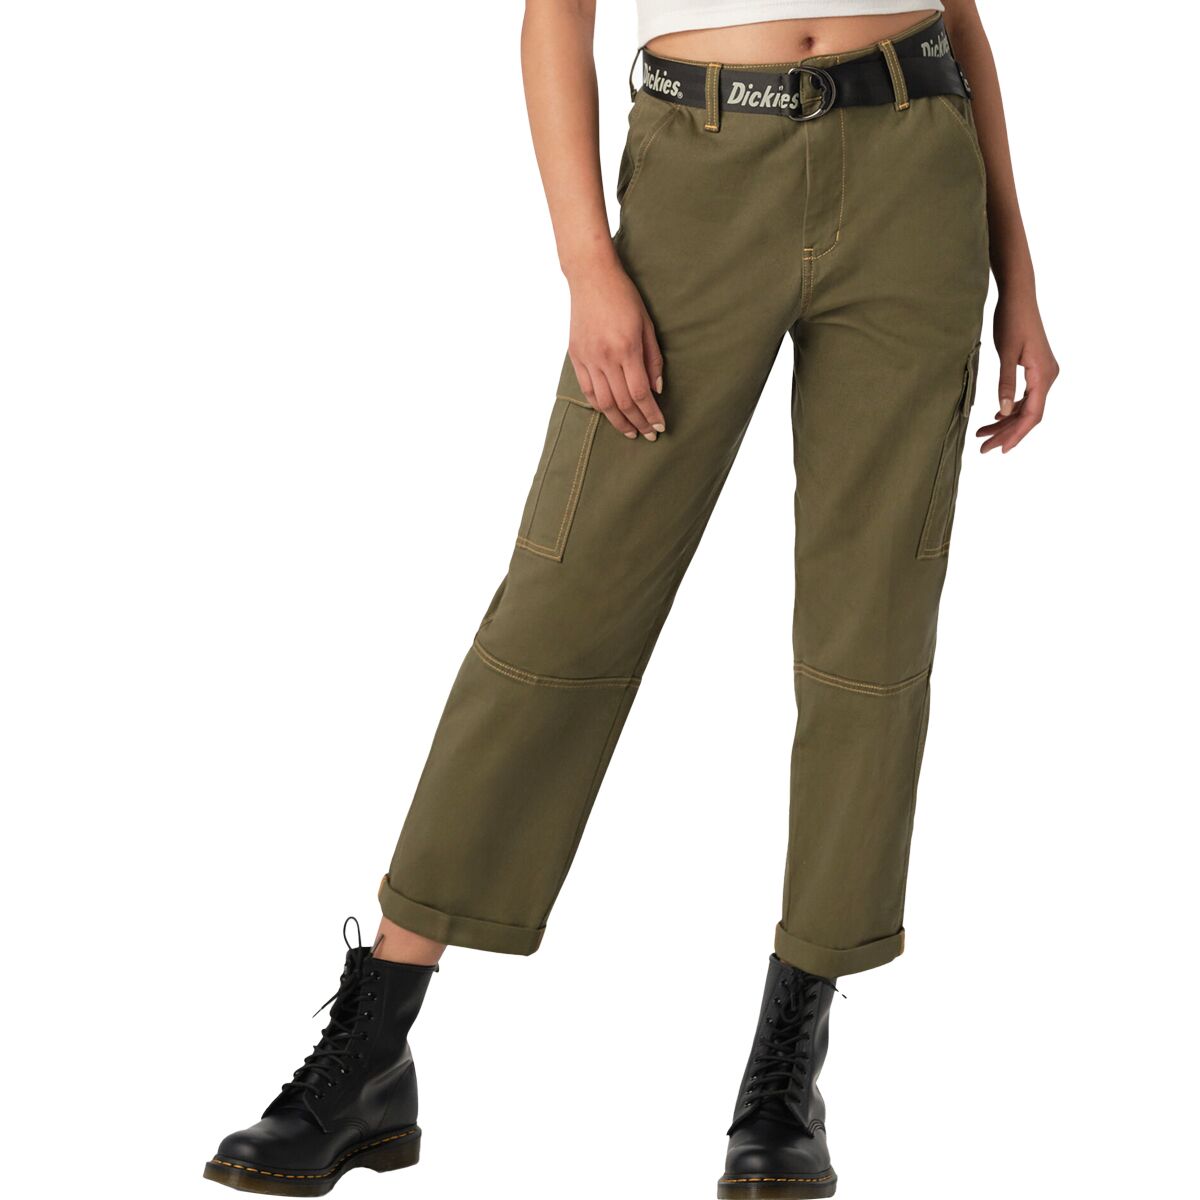 Dickies Women's Contrast Cropped Cargo Pants - Military Green 28